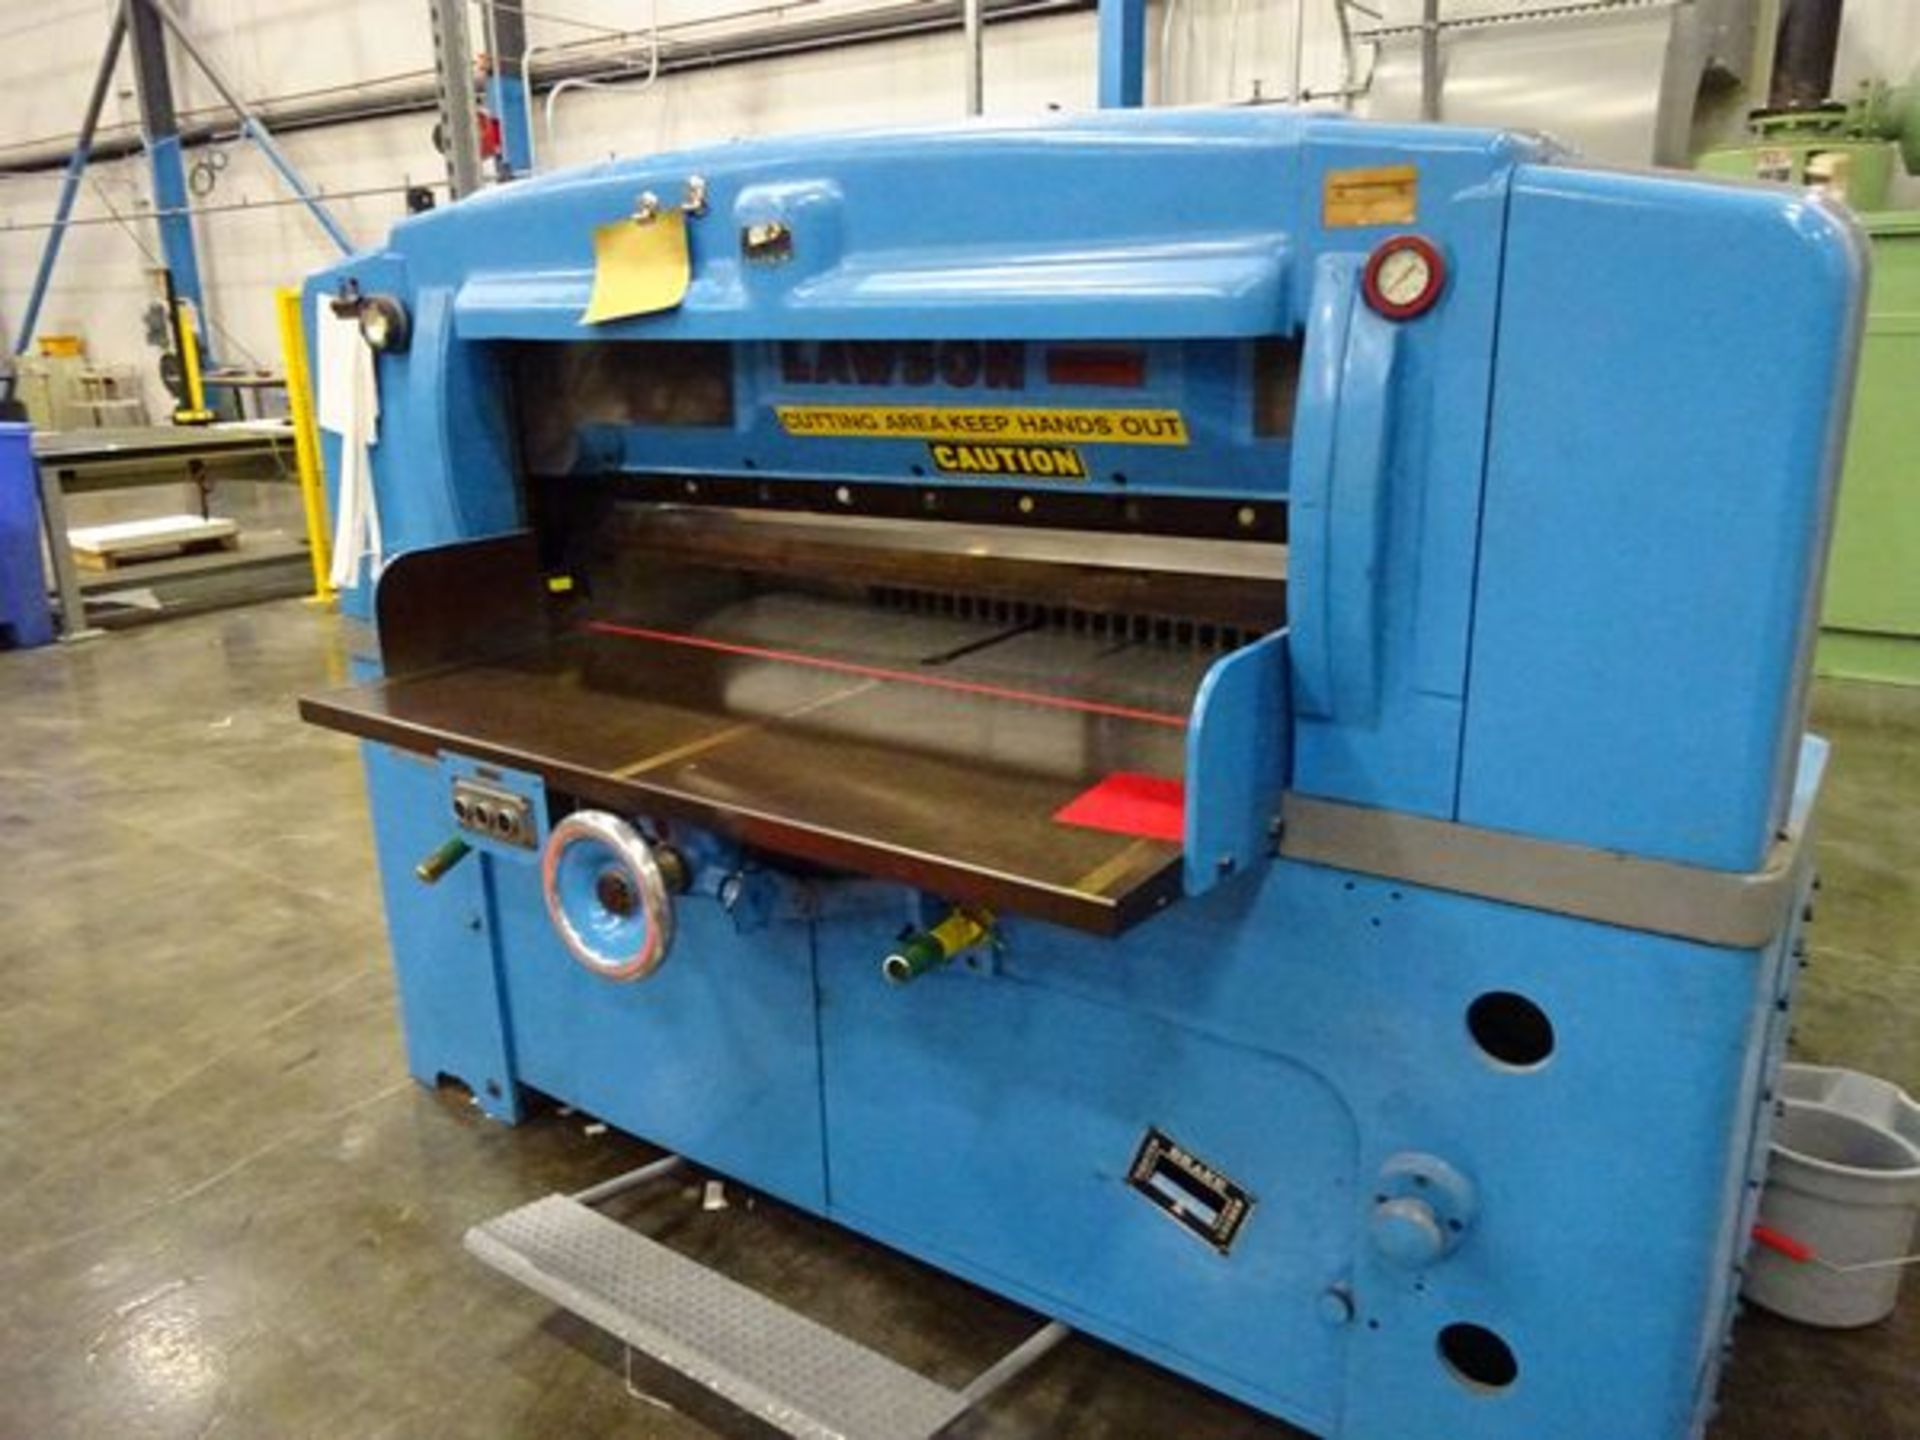 Lawson 52" paper cutter, s/n 428 (Located in South Hadley, MA)